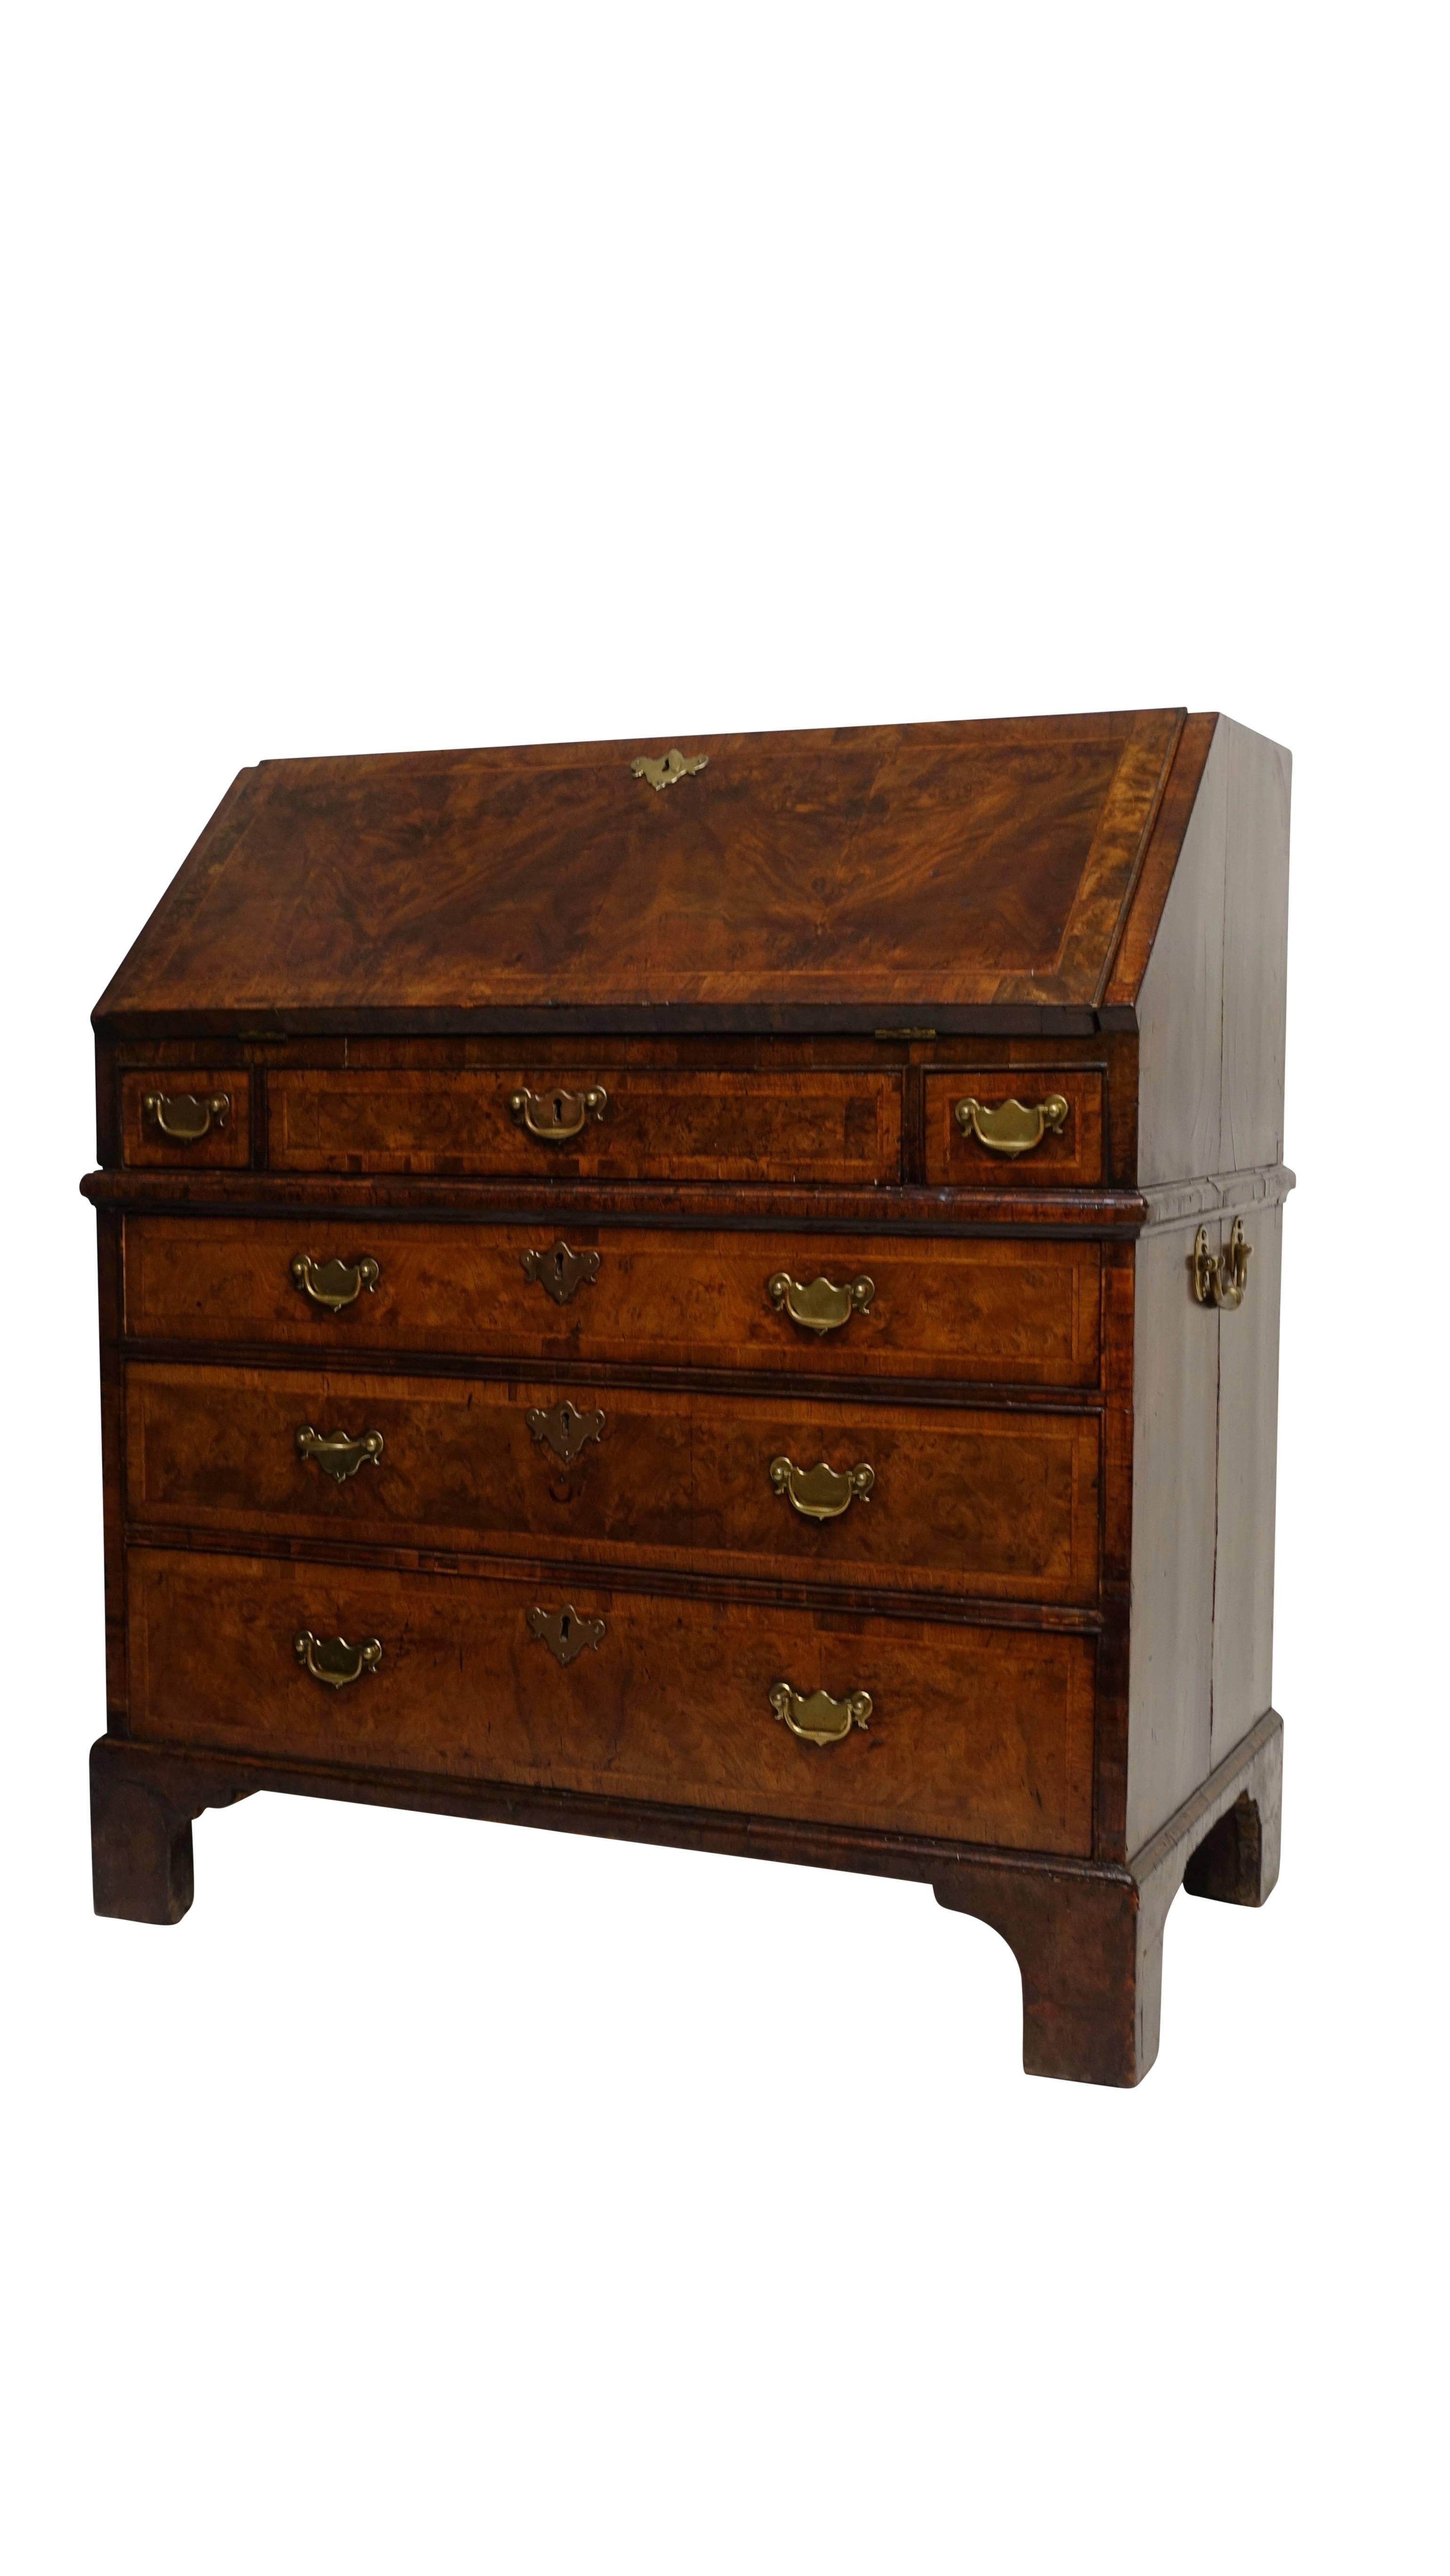 Beautifully made two-piece Georgian walnut with burl walnut slant front desk. Three short drawers above three graduated drawers having satinwood inlay with herring bone pattern, replaced brass drawer pulls and sitting on bracket feet. Interior